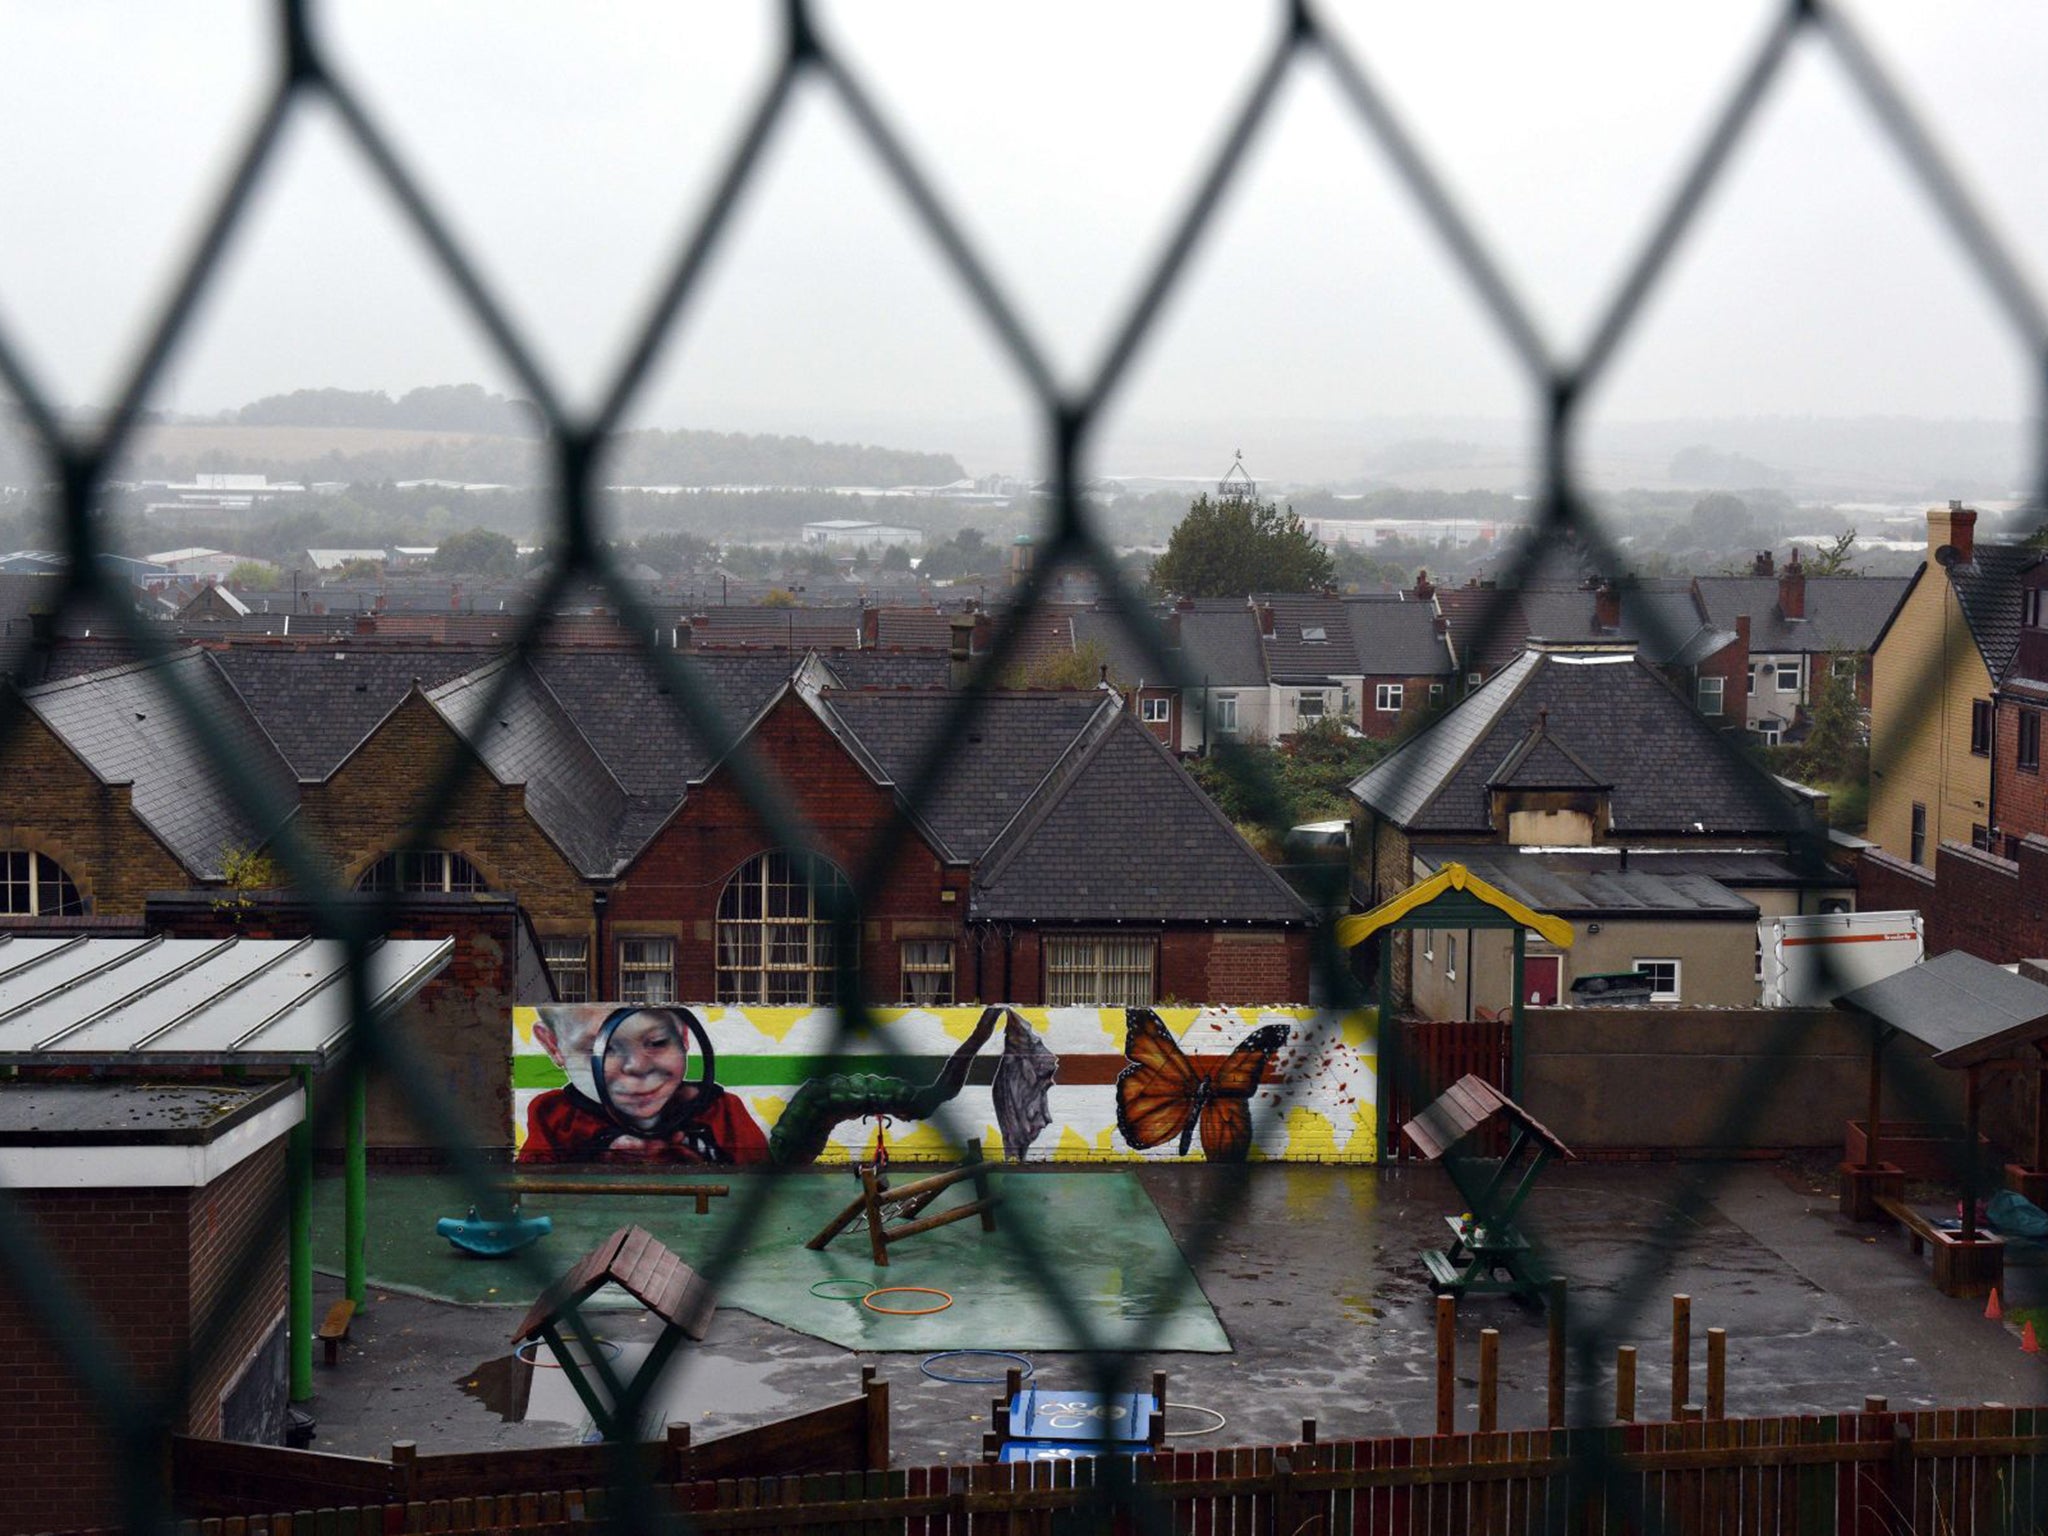 More than 1,400 girls fell victim to paedophile gangs over 16 years in Rotherham